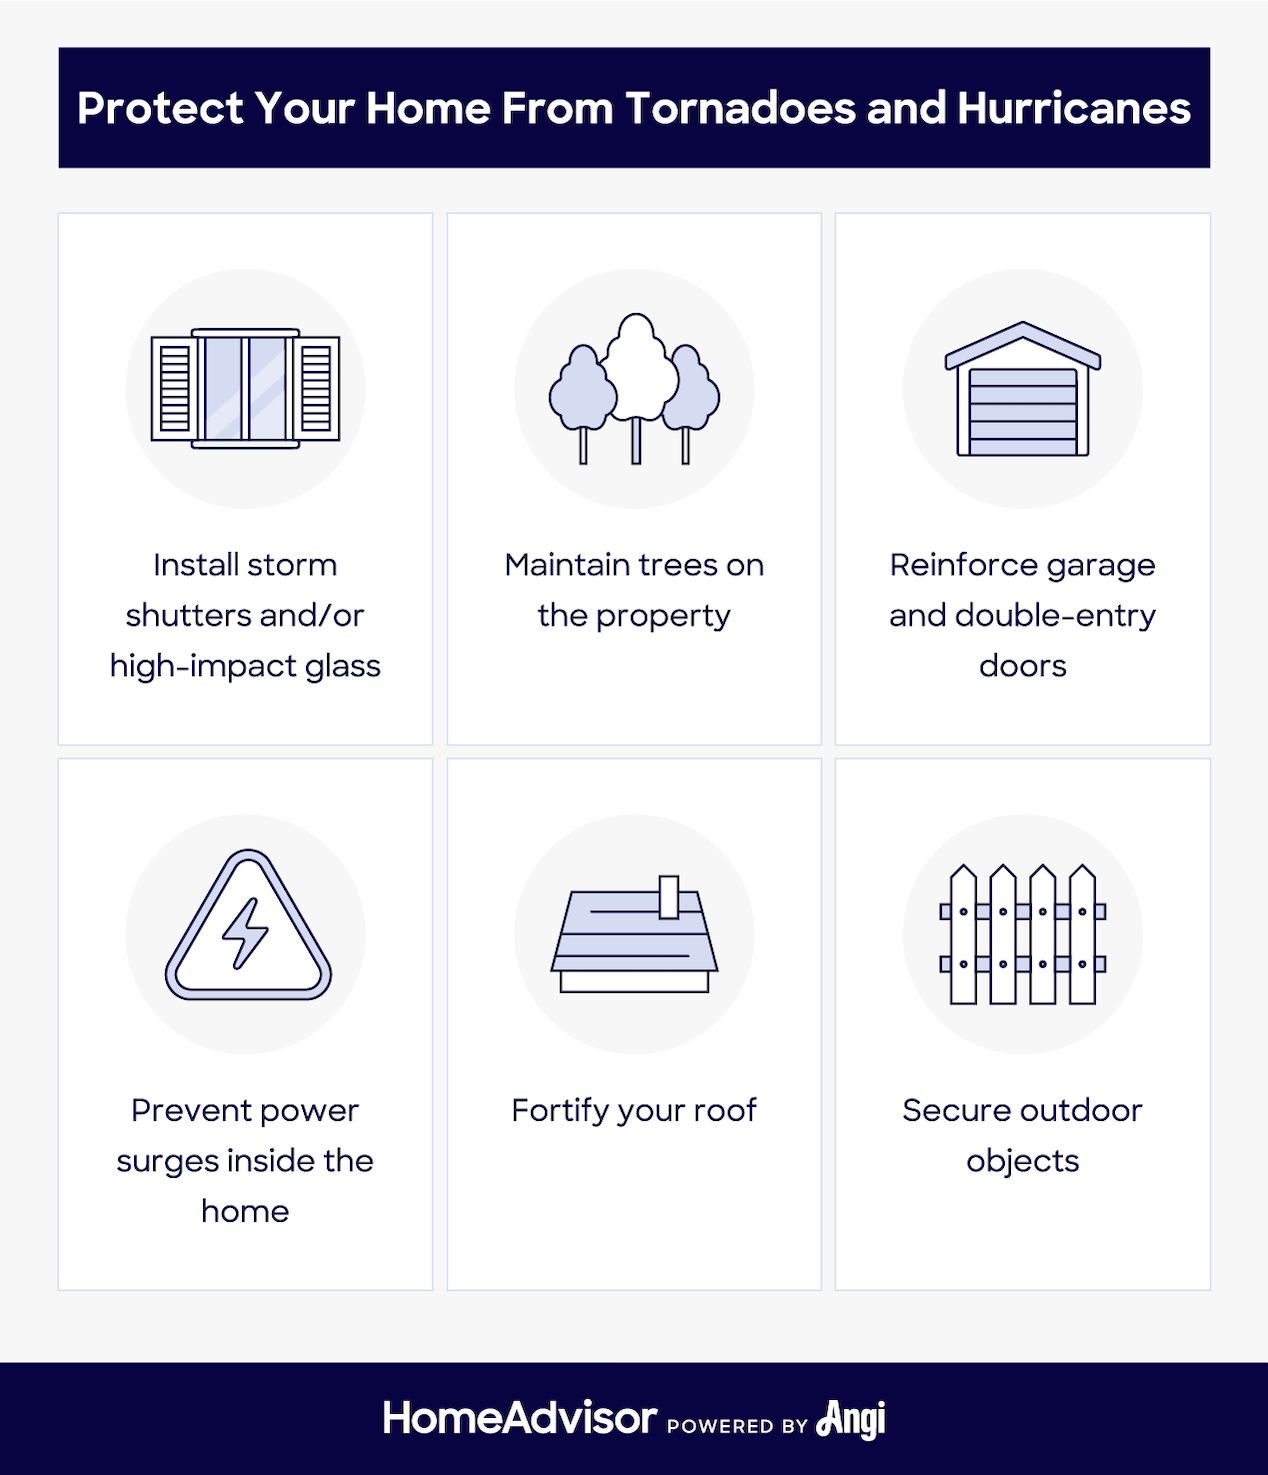 An infographic with steps to take to protect your home from hurricanes and tornadoes